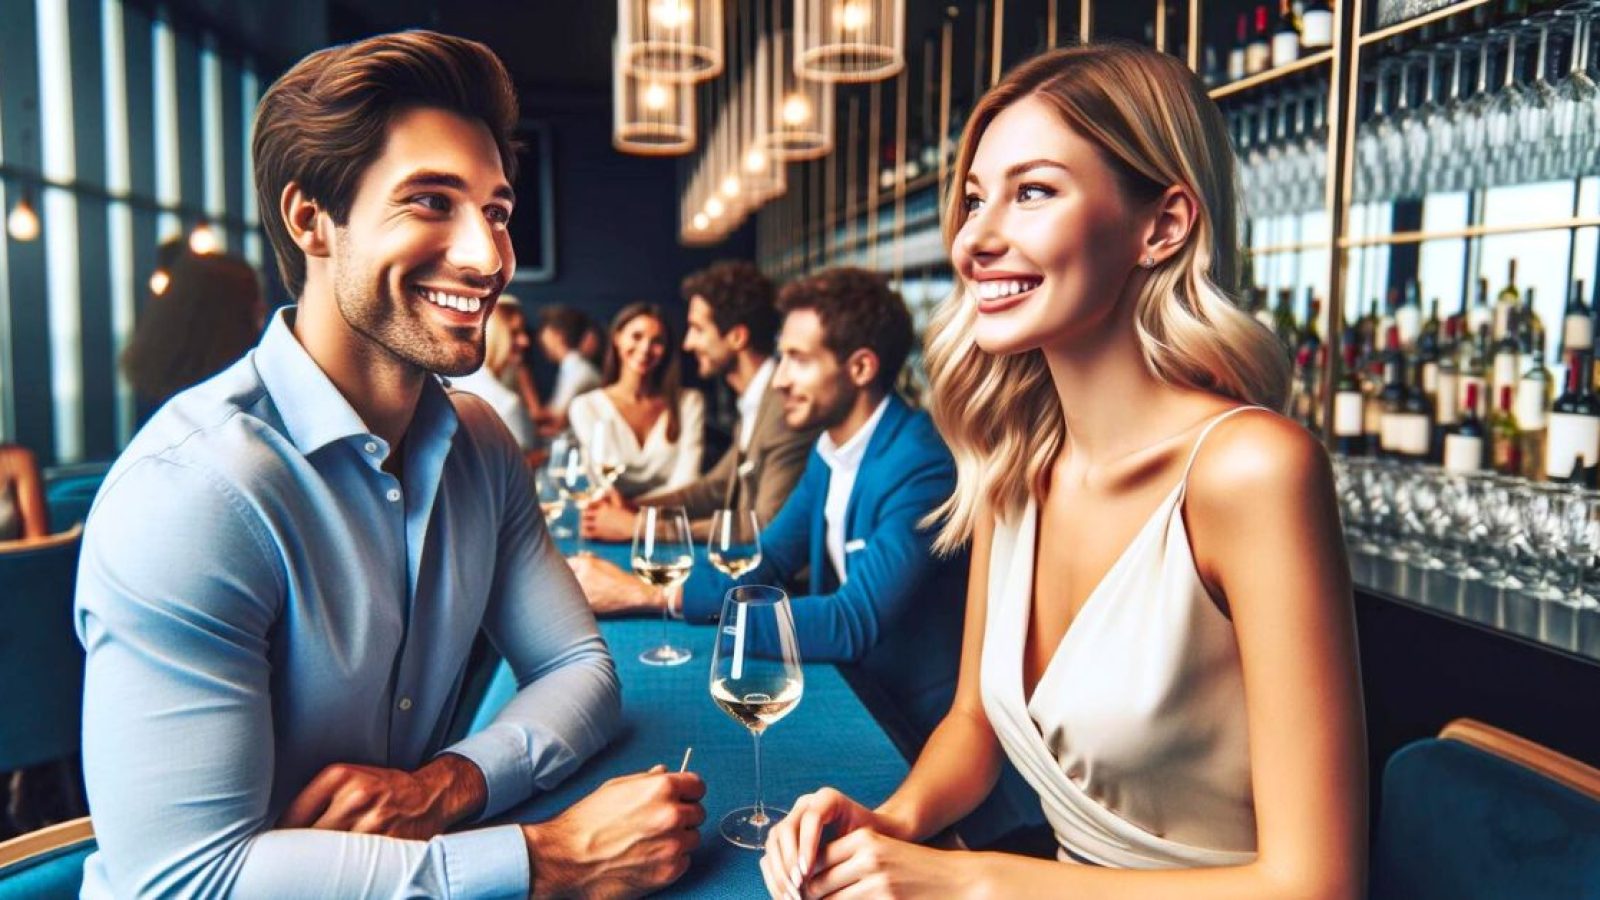 man and woman on a date at a singles event in a bar